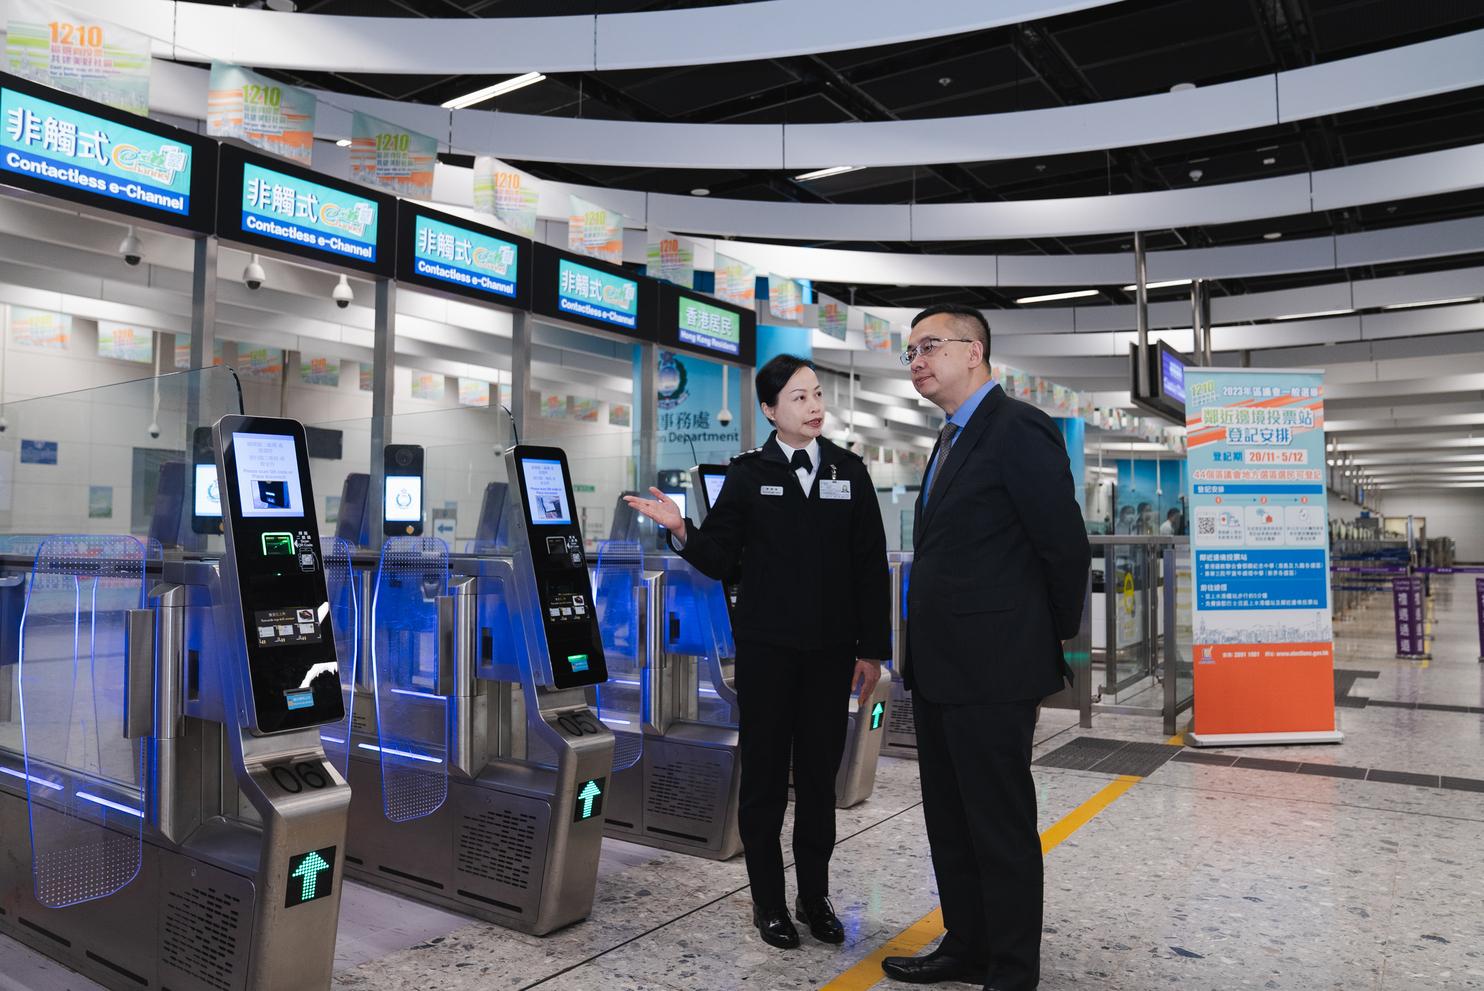 The Director of Immigration, Mr Benson Kwok, visited the Express Rail Link West Kowloon Control Point on December 4 (Monday) to understand the preparation works for the polling day of the District Council election.